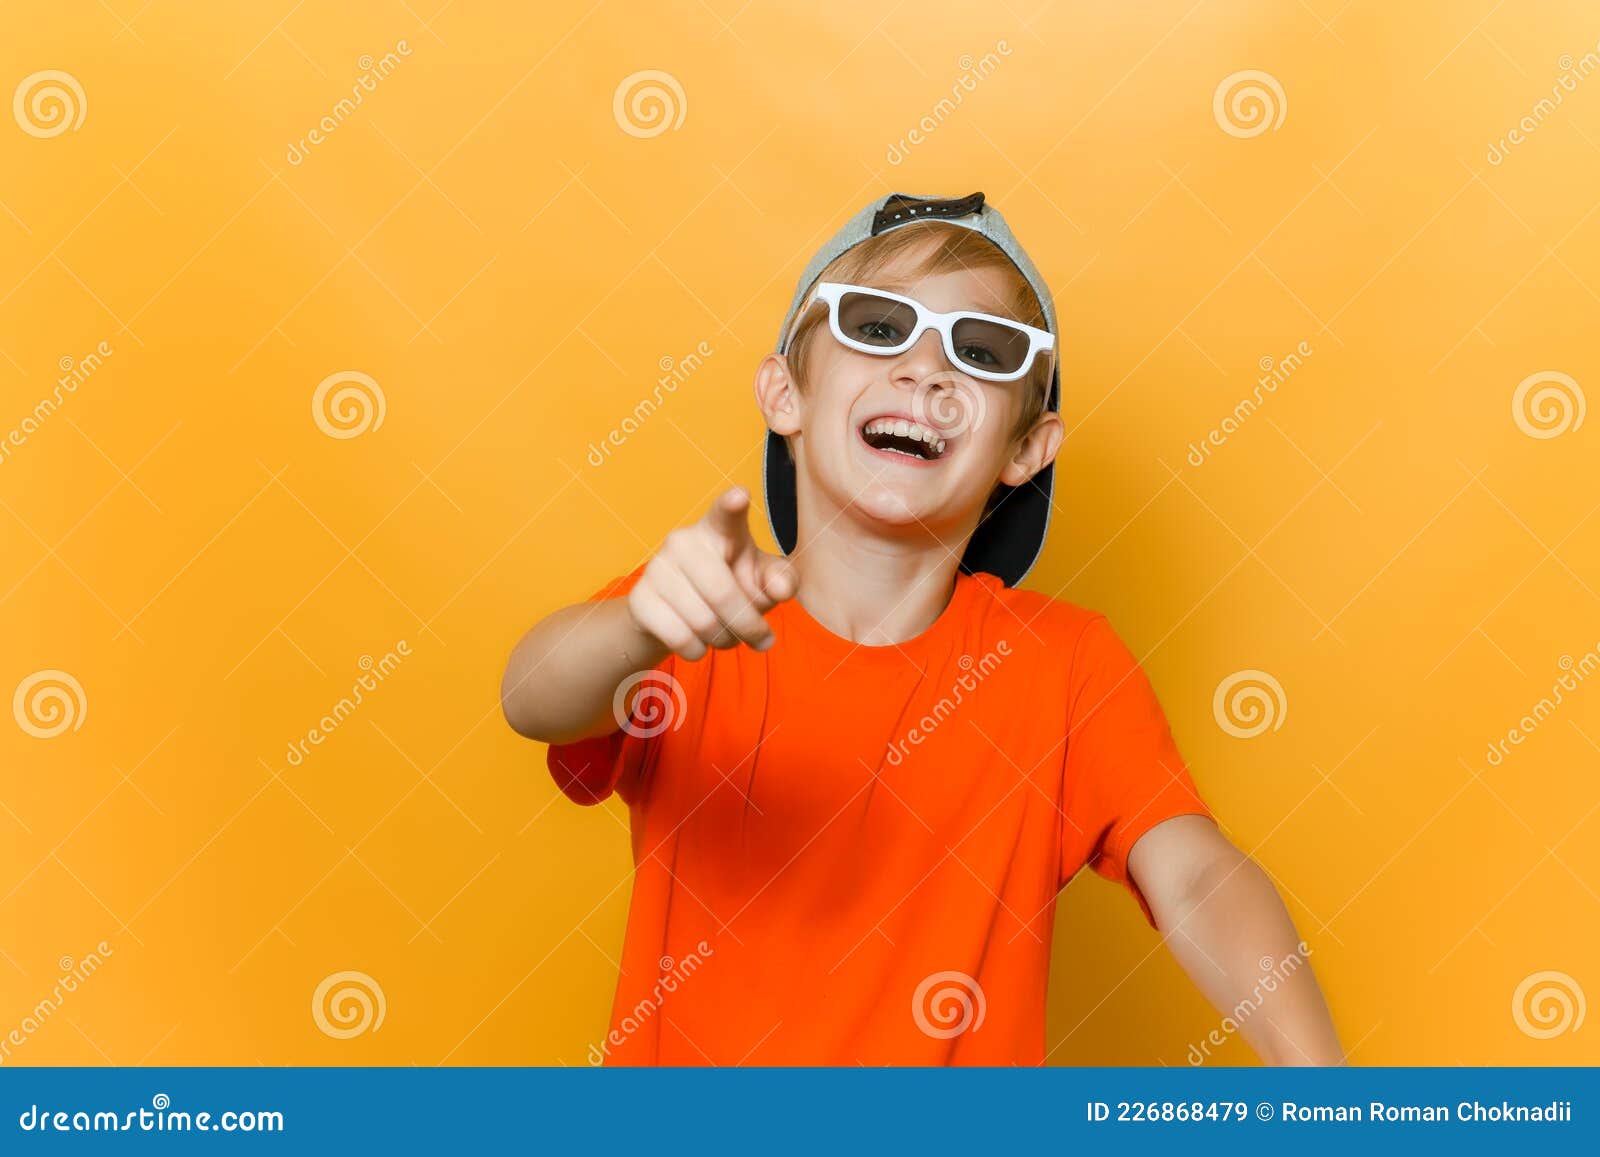 child wearing glasses for watching movies points his finger forward and mocks